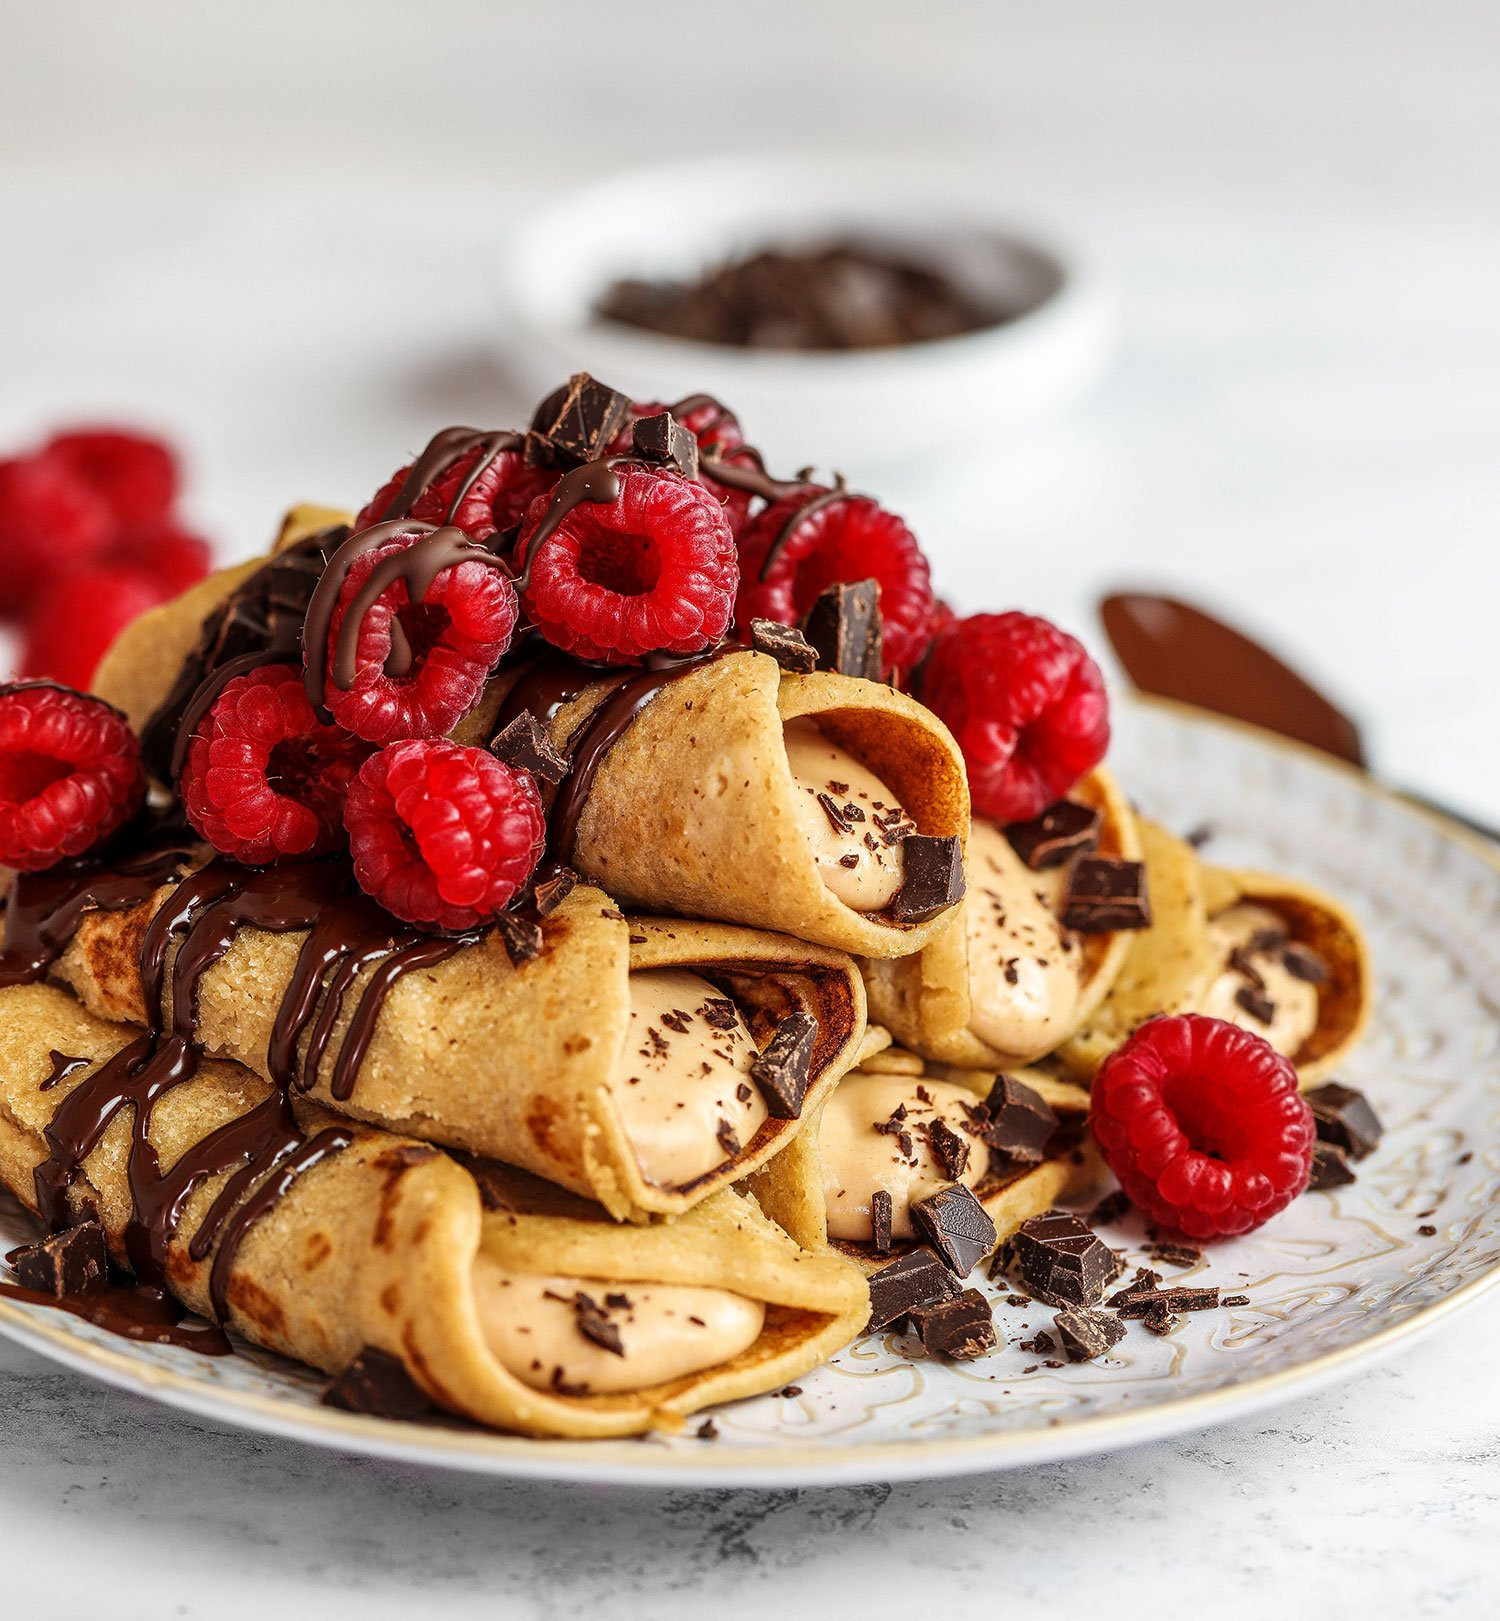 Are Crepes Gluten Free Fresh Vegan and Gluten Free Crepes Uk Health Blog Nadia S